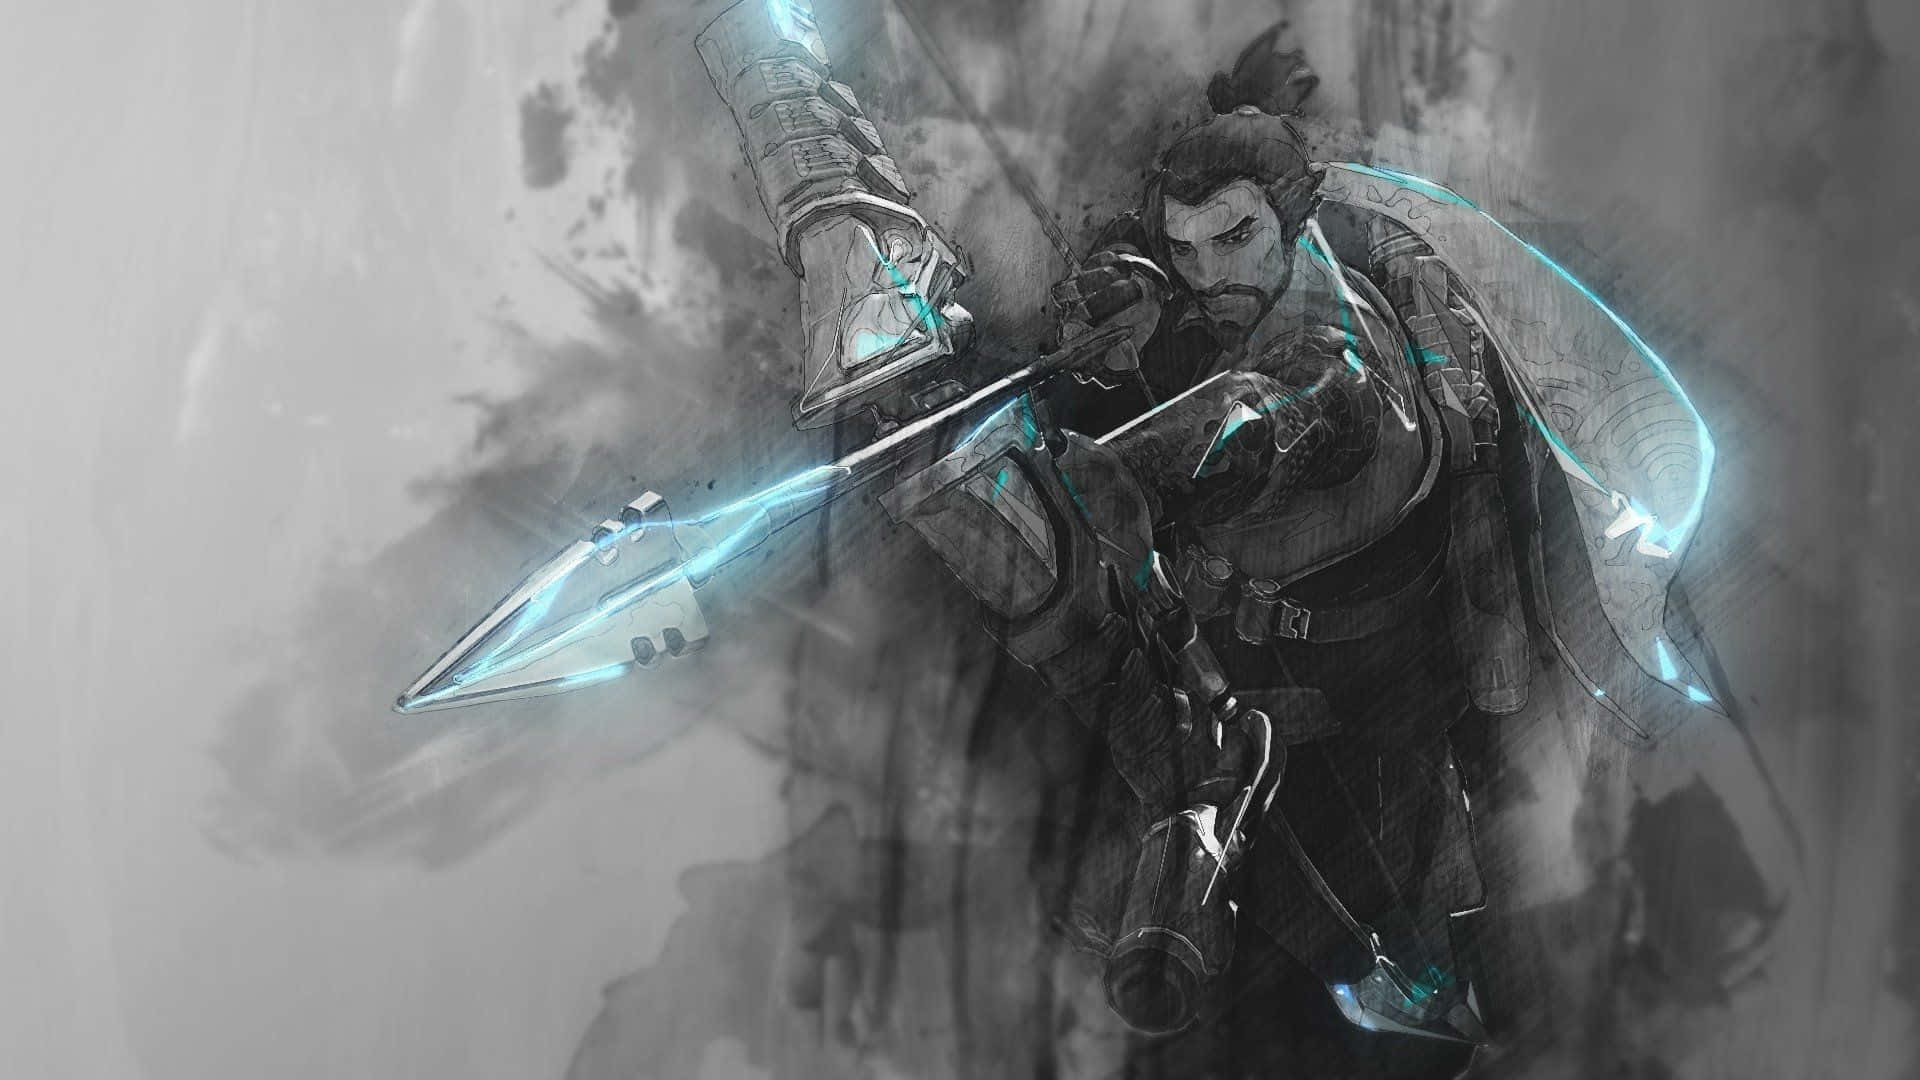 Hanzo, the master bowman from Overwatch, ready for action Wallpaper